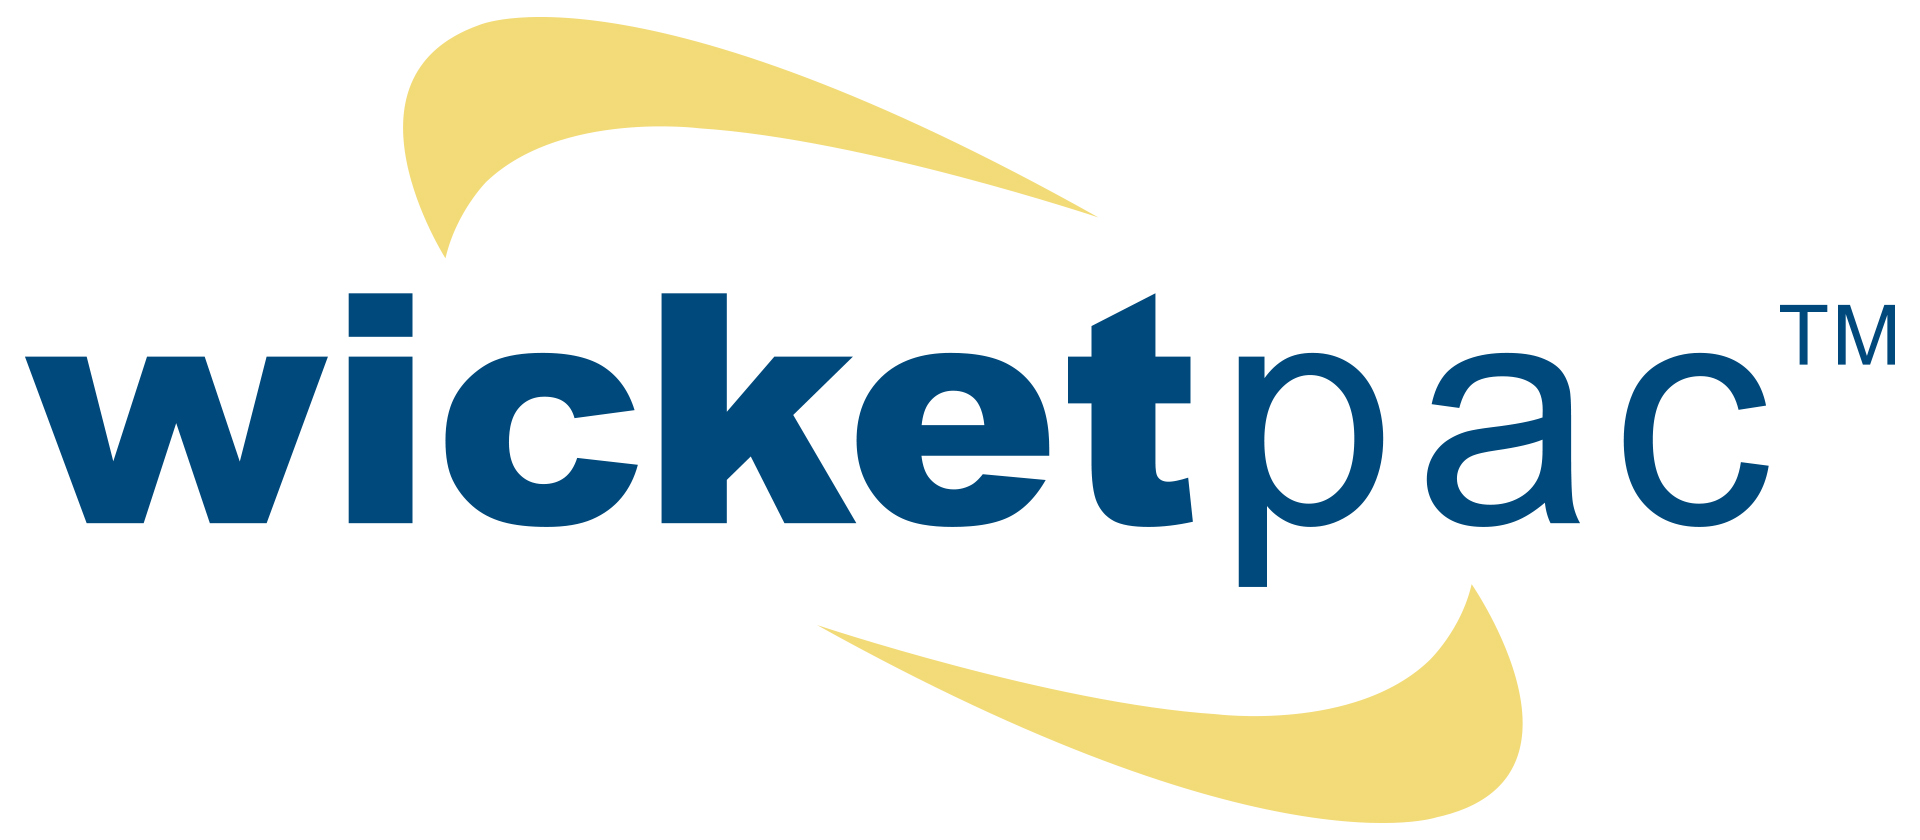 WicketPAC product logo